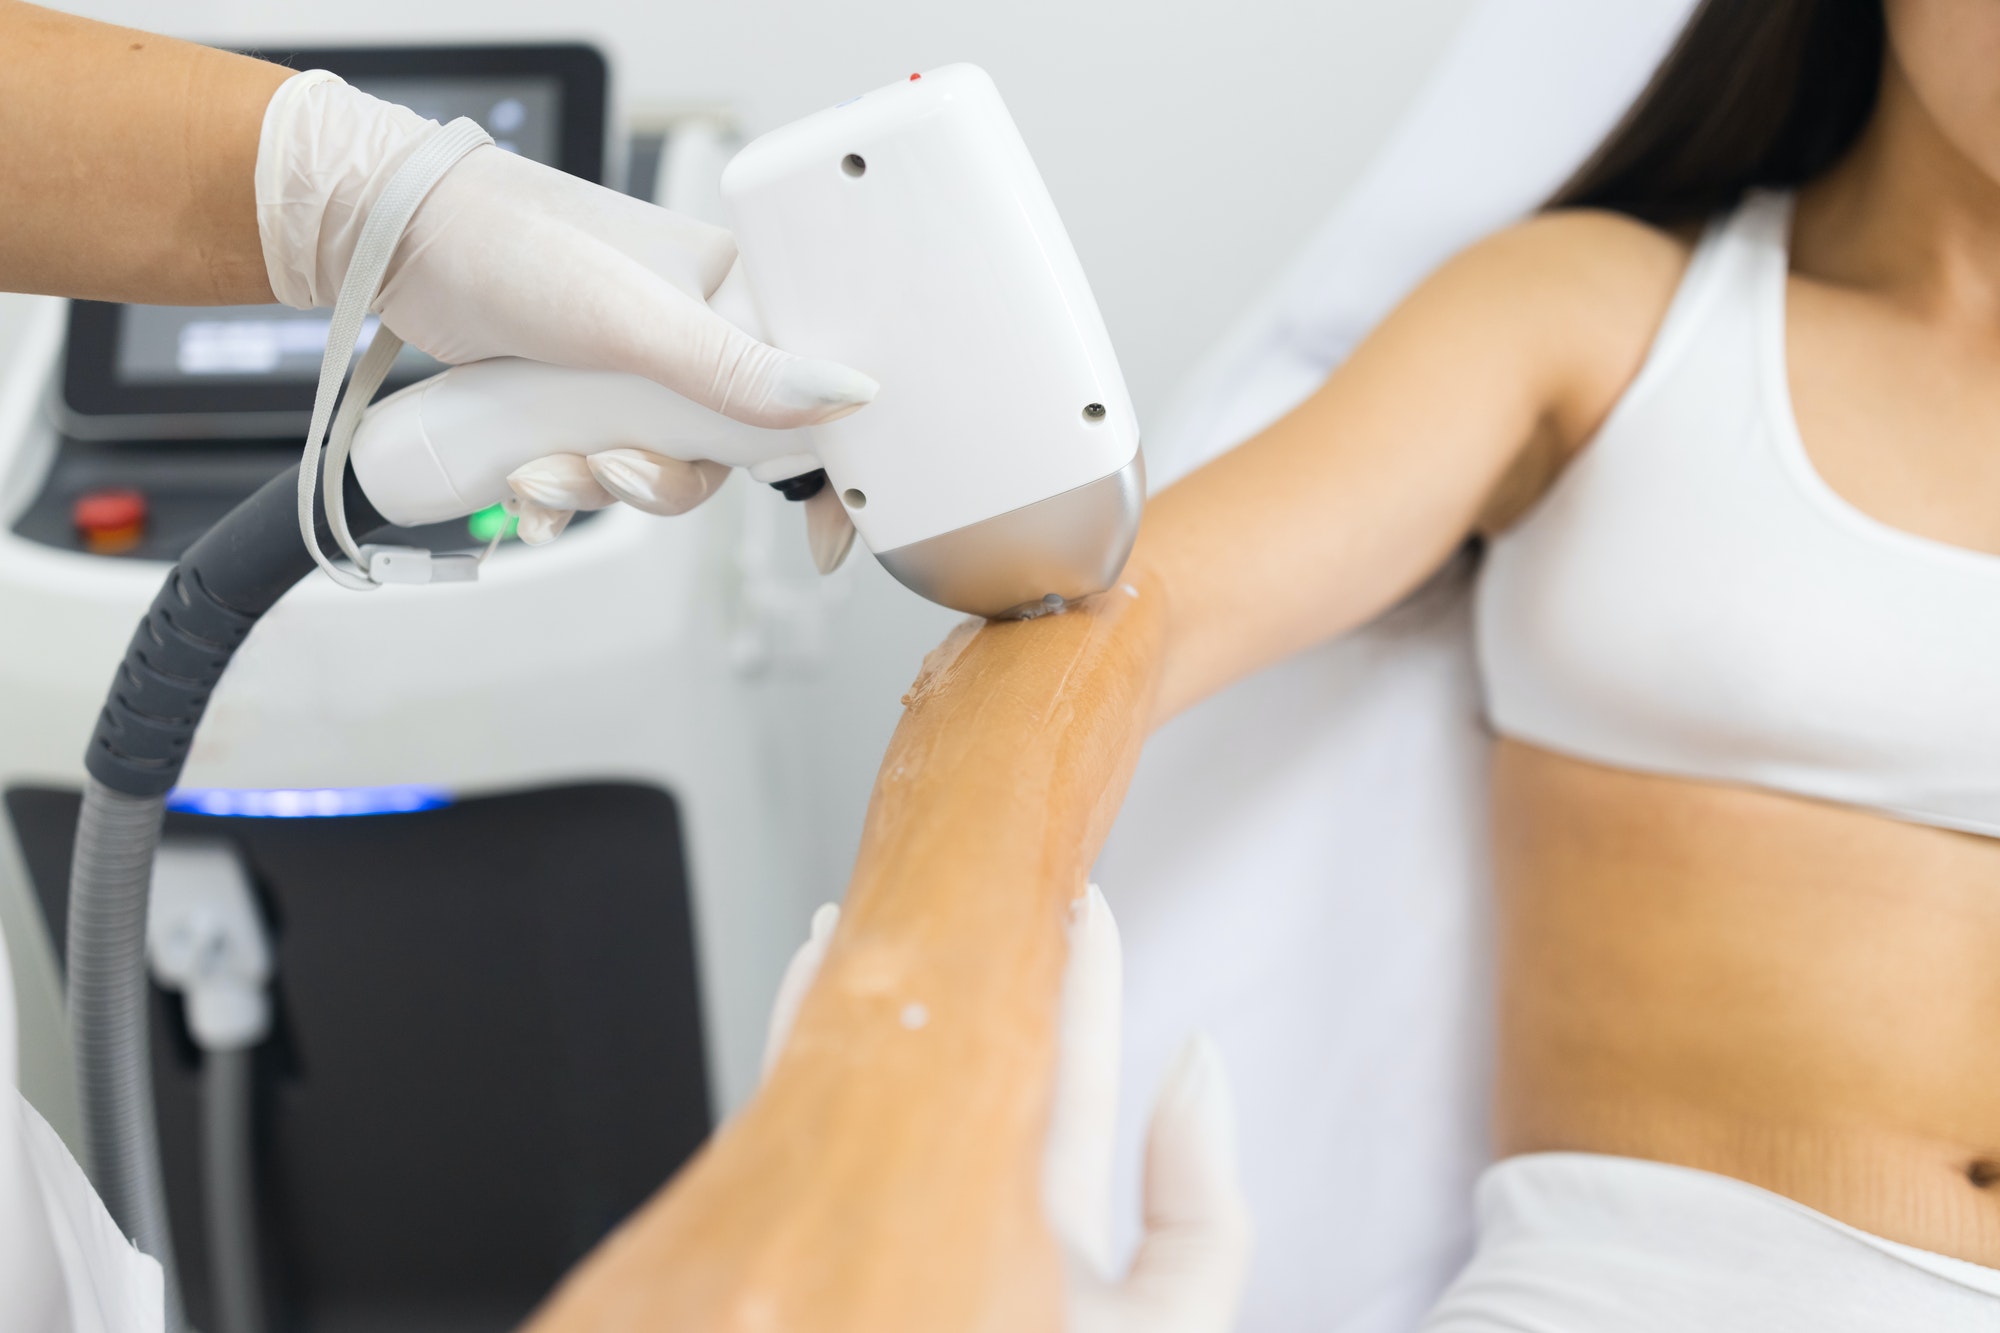 Doctor makes to brunette woman in white underwear a laser hair removal procedure